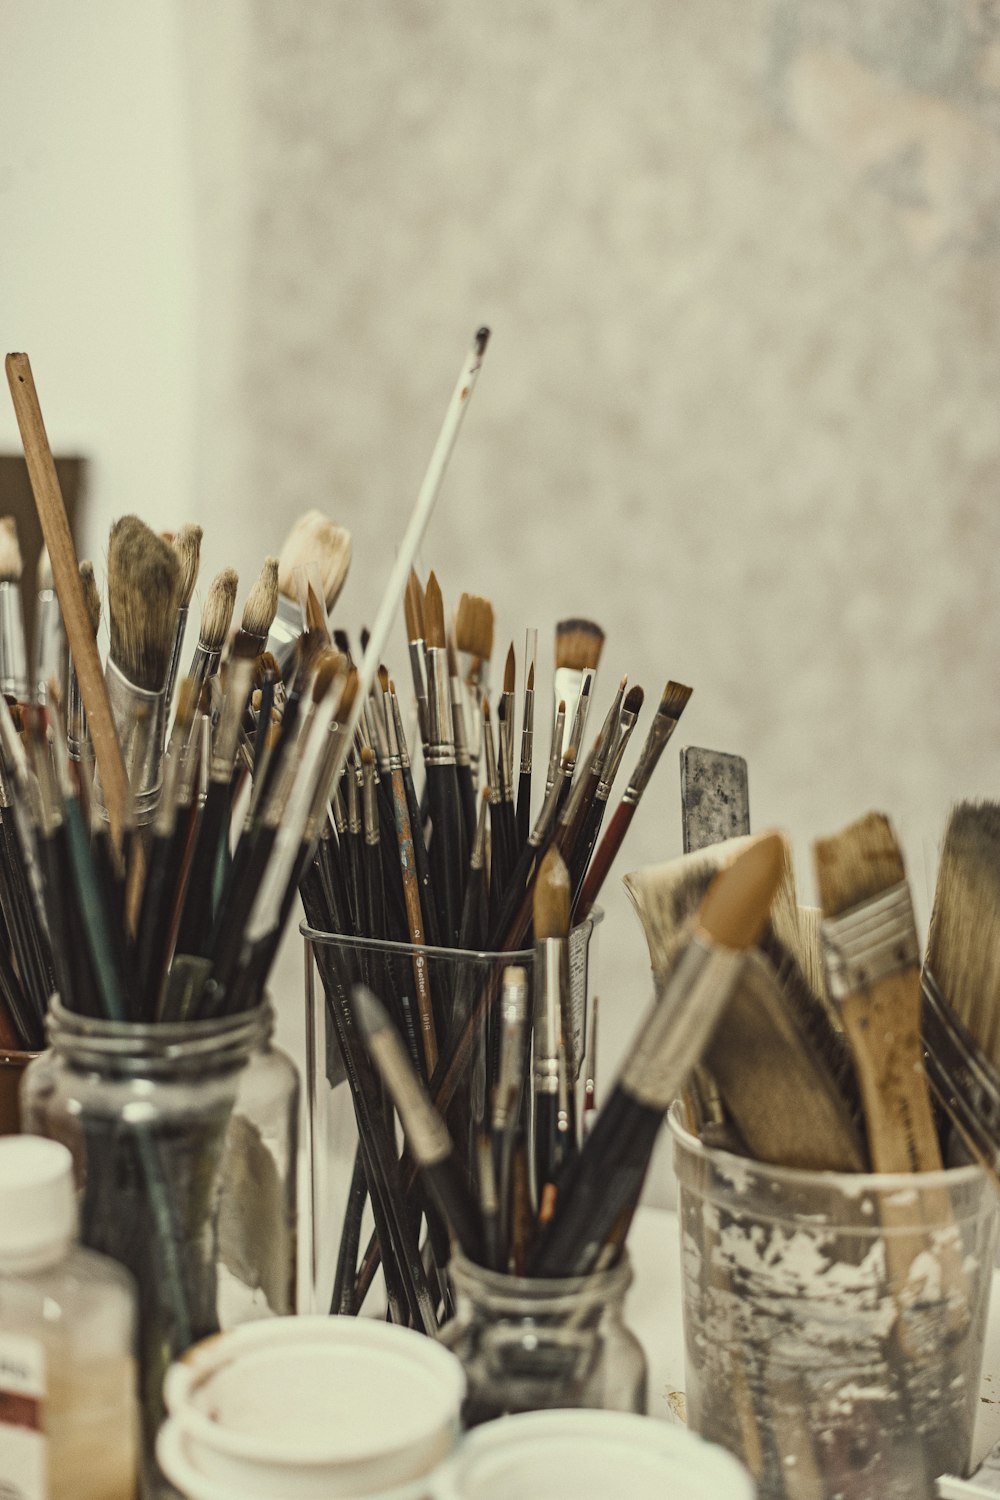 Art Tools Pictures  Download Free Images on Unsplash